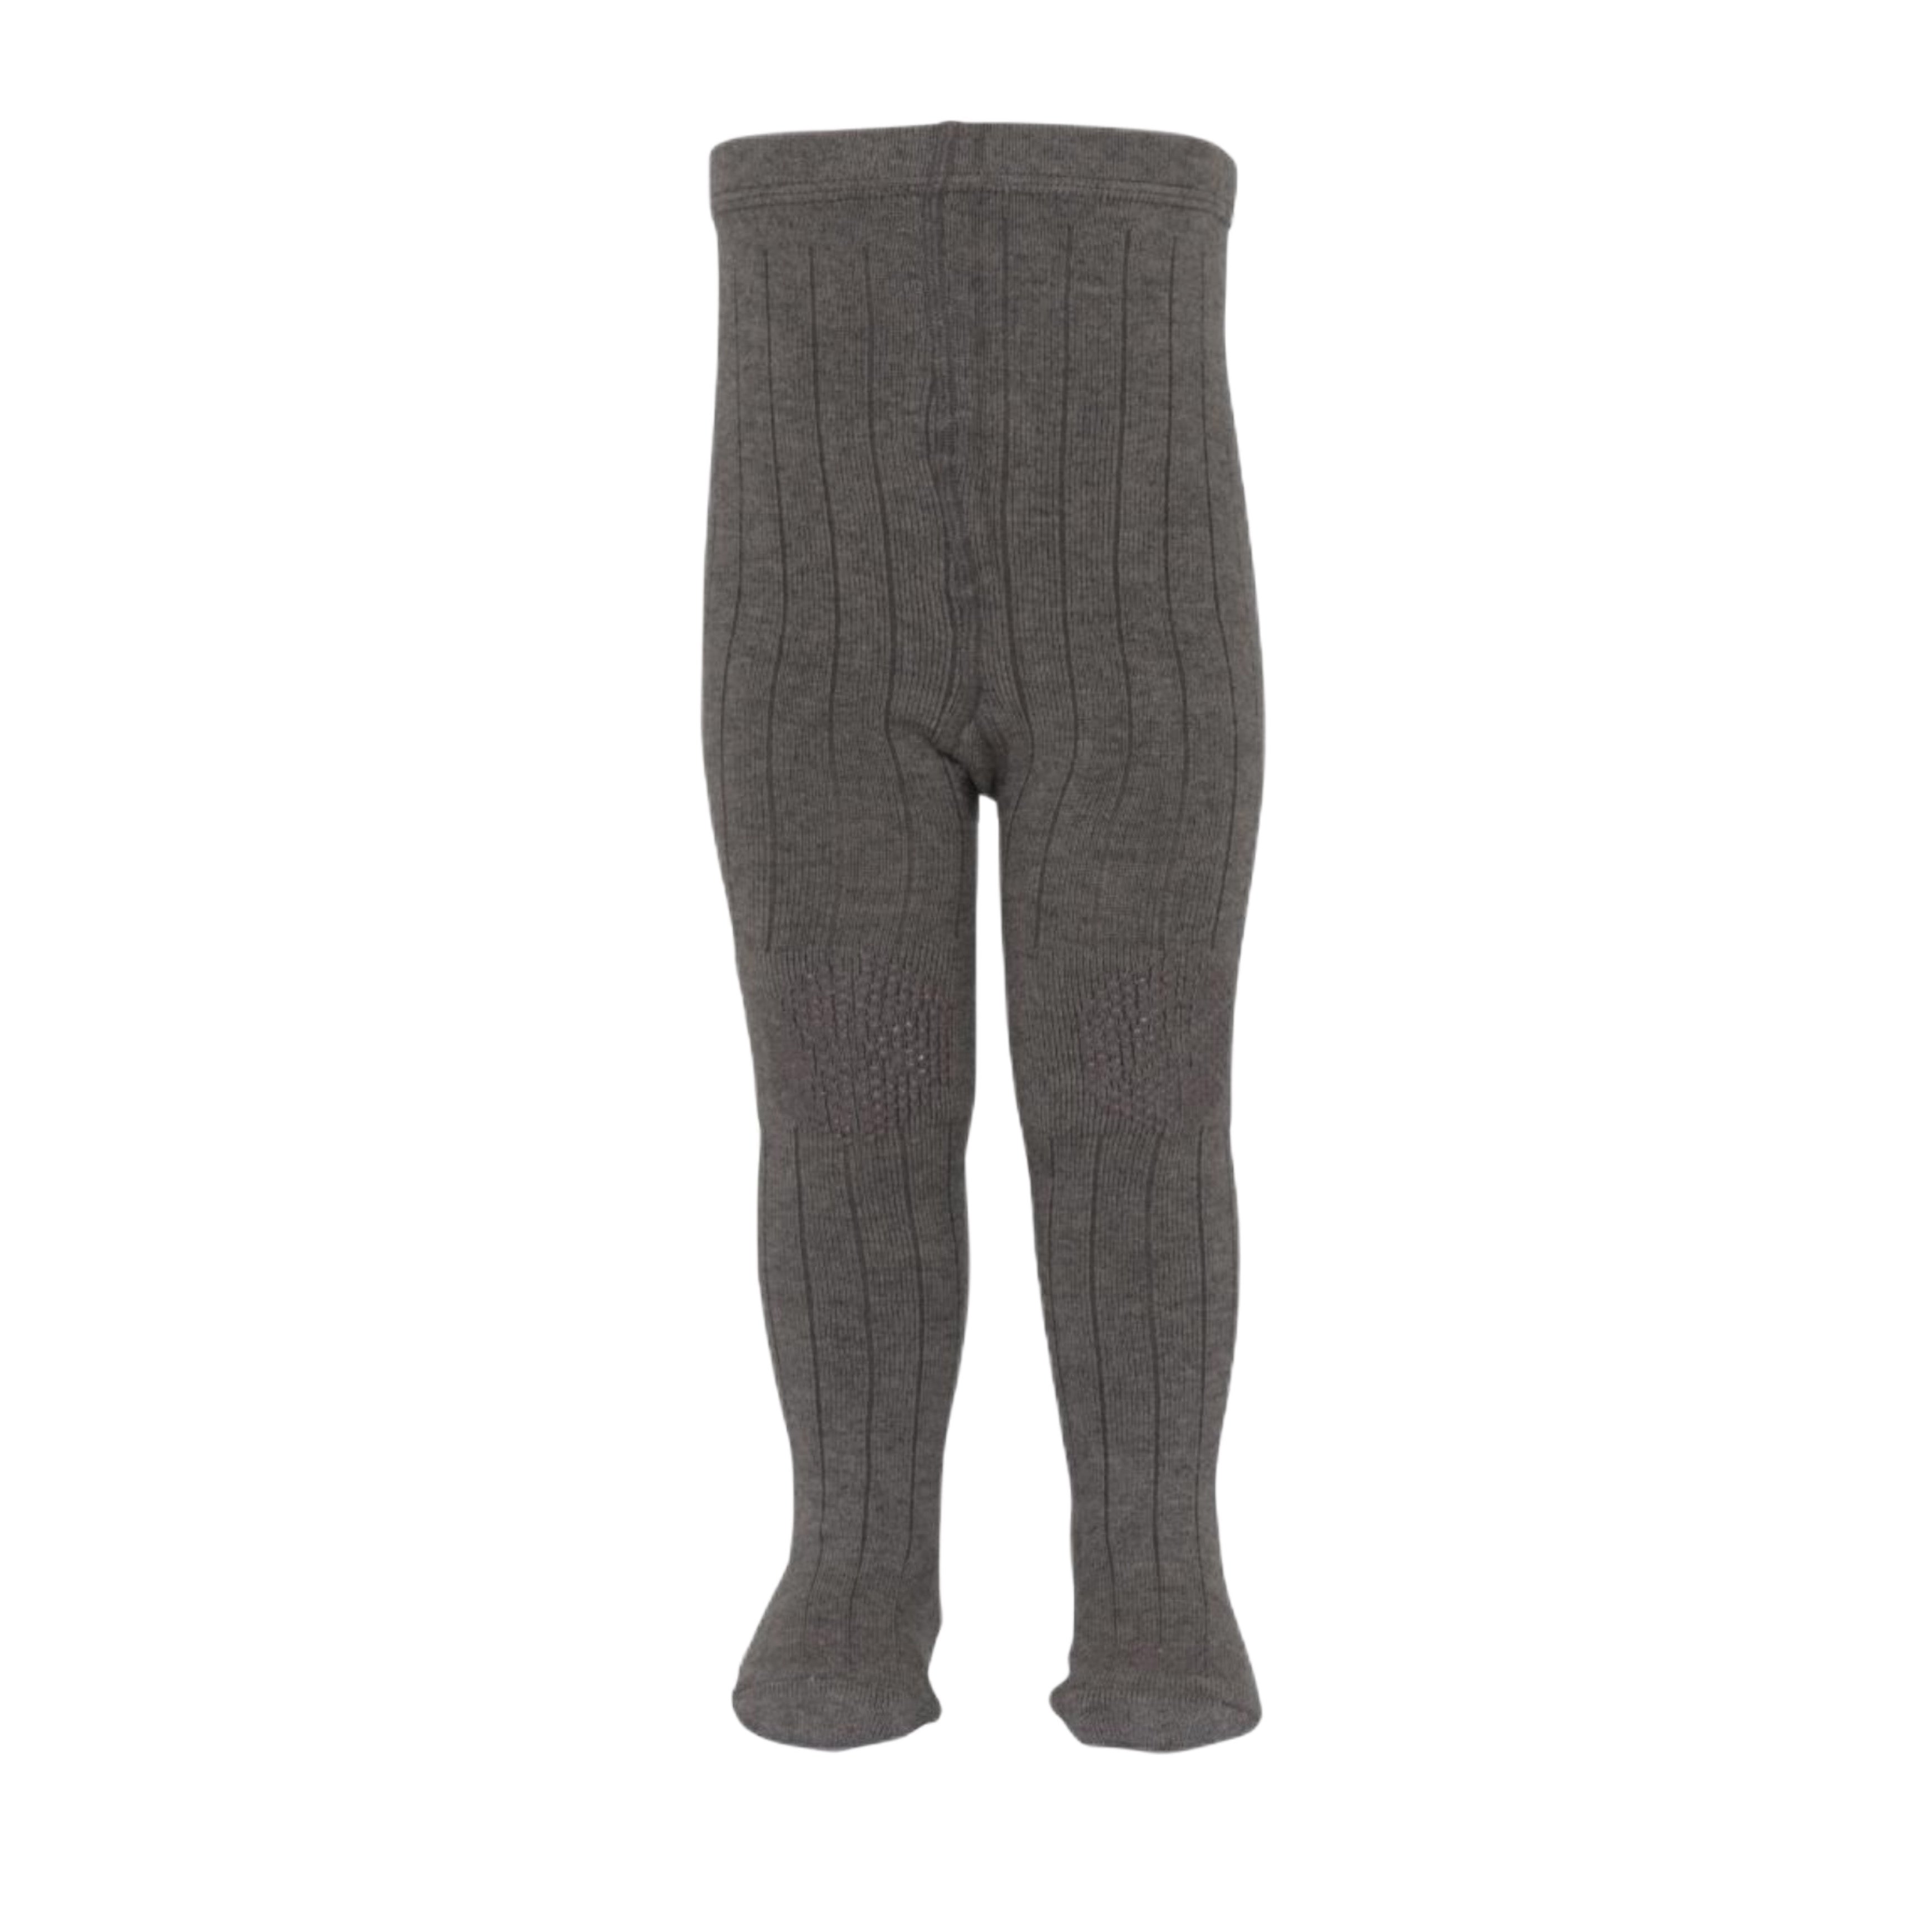 Melton bamboo/wool tights - let's go